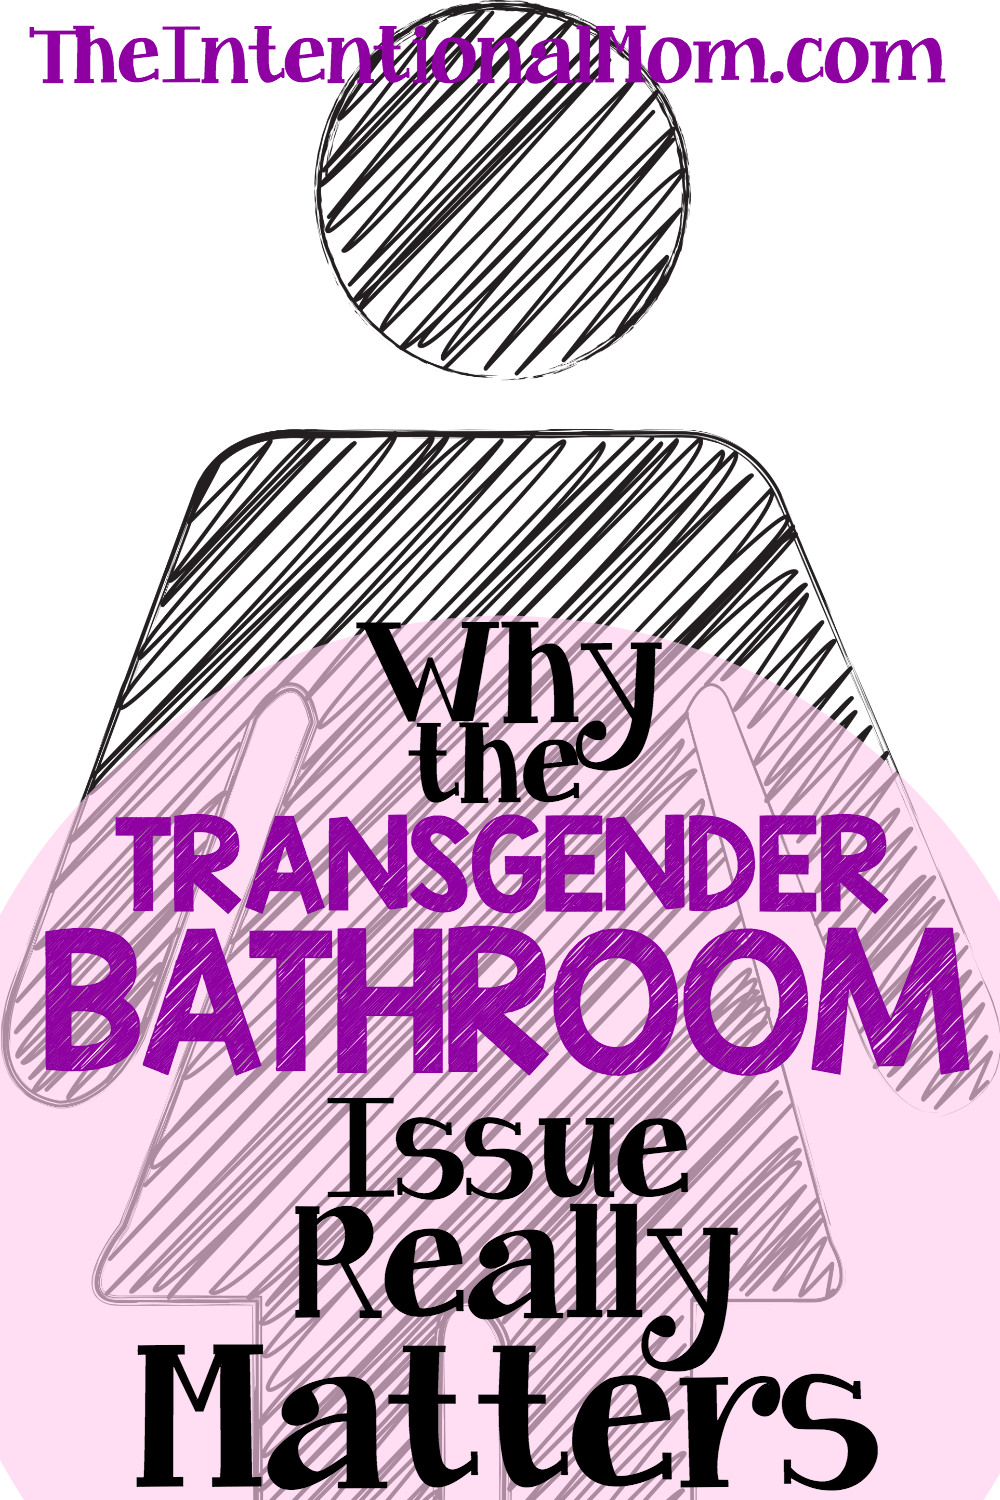 Why the Transgender Bathroom Issue Really Matters